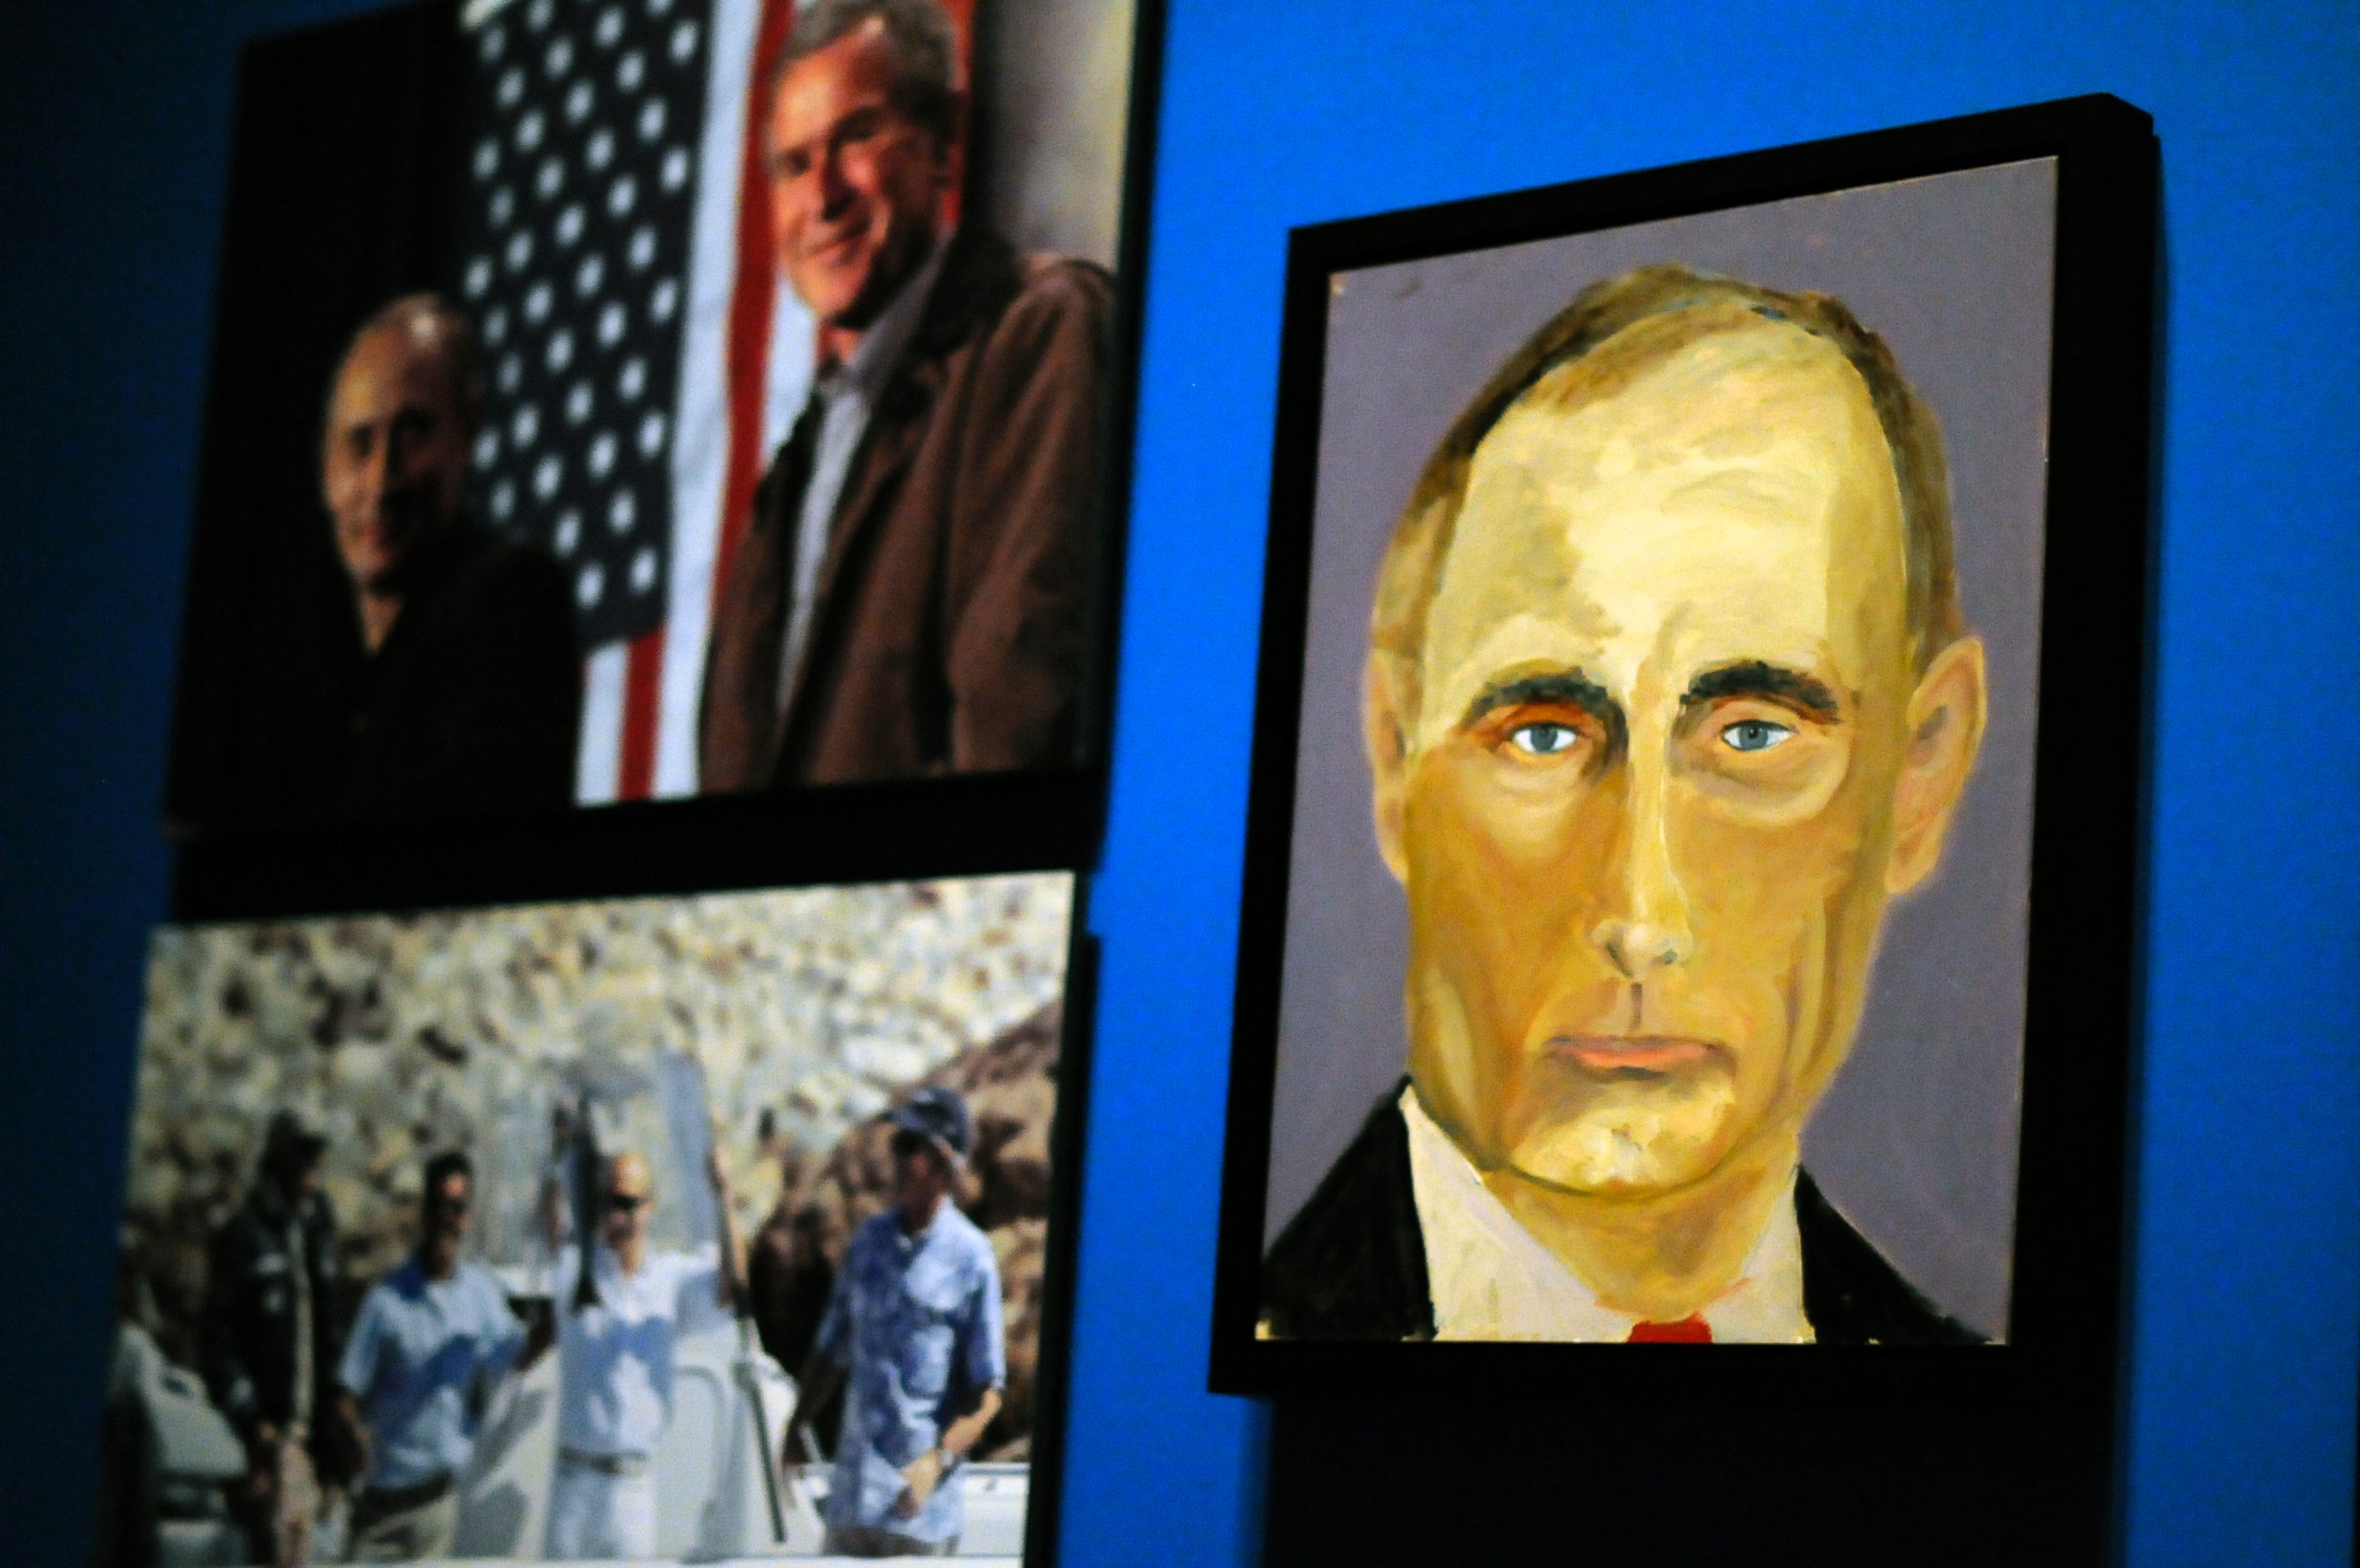 PHOTO: A portrait of Russian President Vladimir Putin which is part of the exhibit "The Art of Leadership: A President's Diplomacy," are on display at the George W. Bush Presidential Library and Museum in Dallas, April 4, 2014.